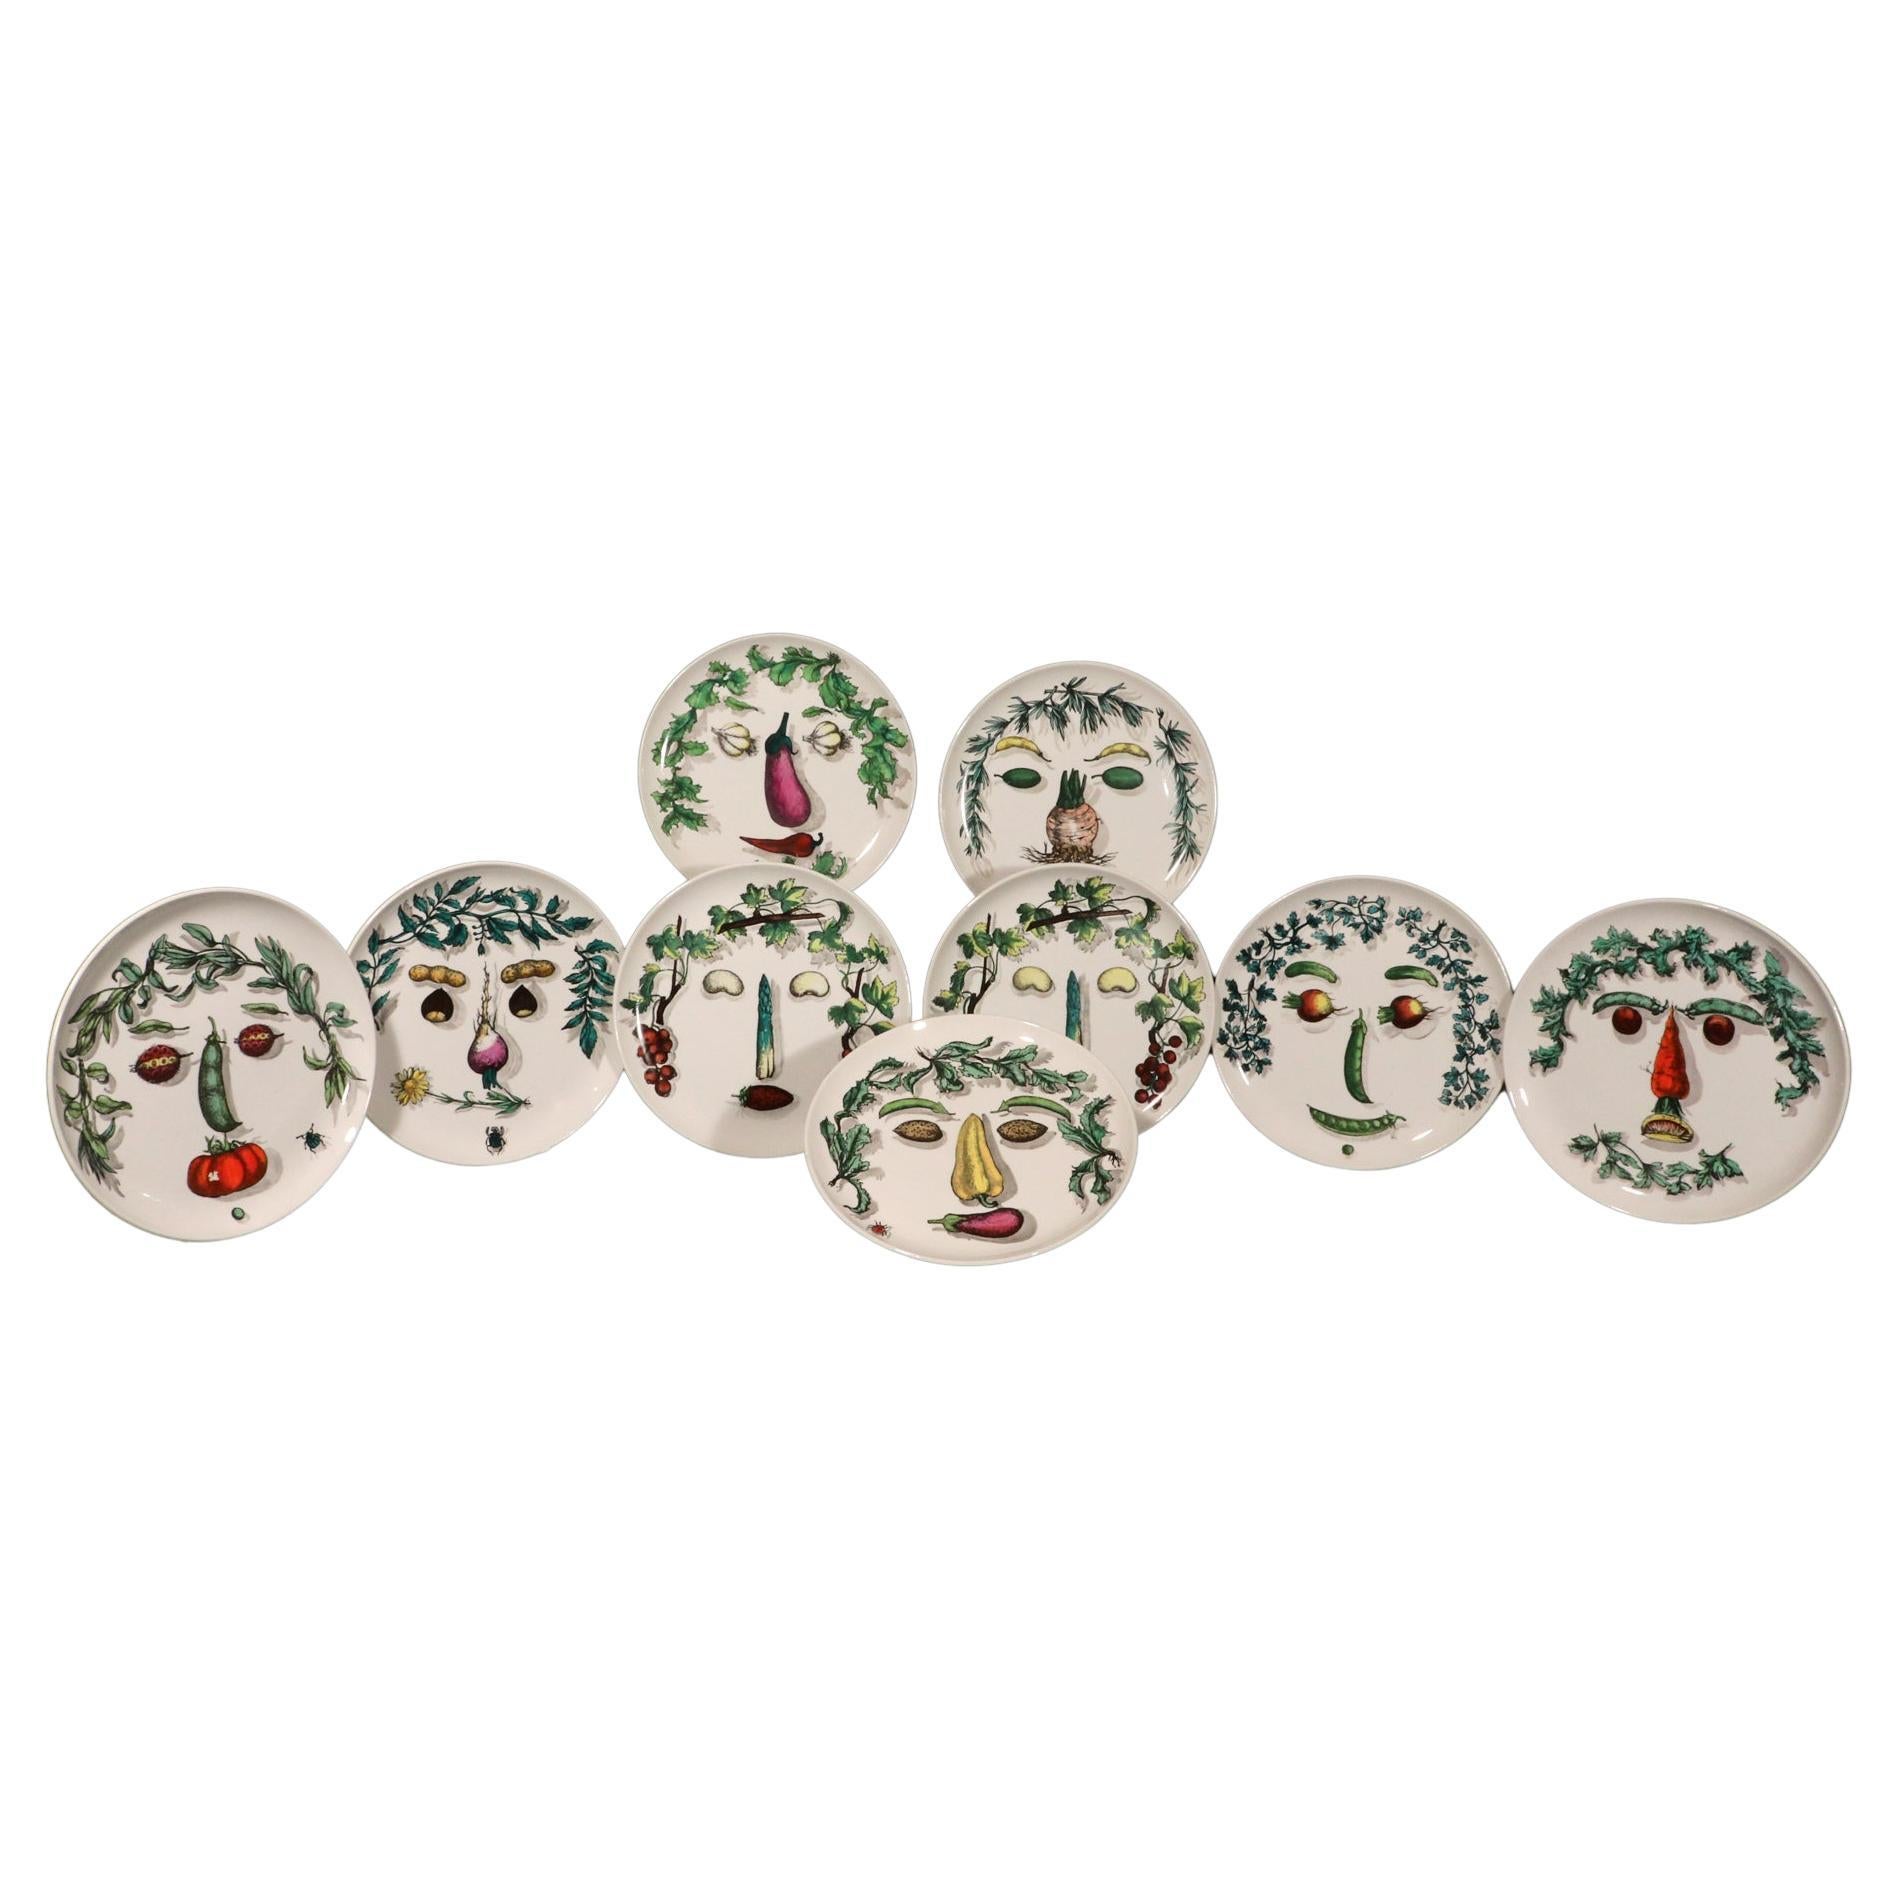 Piero Fornasetti Pottery Arcimboldesca-Motif Vegetable Face Plates,
After Giuseppe Arcimboldo,
Set of Nine,
Circa 1970s.

The plates are after Giuseppe Arcimboldo- the design of a face creatively designed with the use of various vegetables and